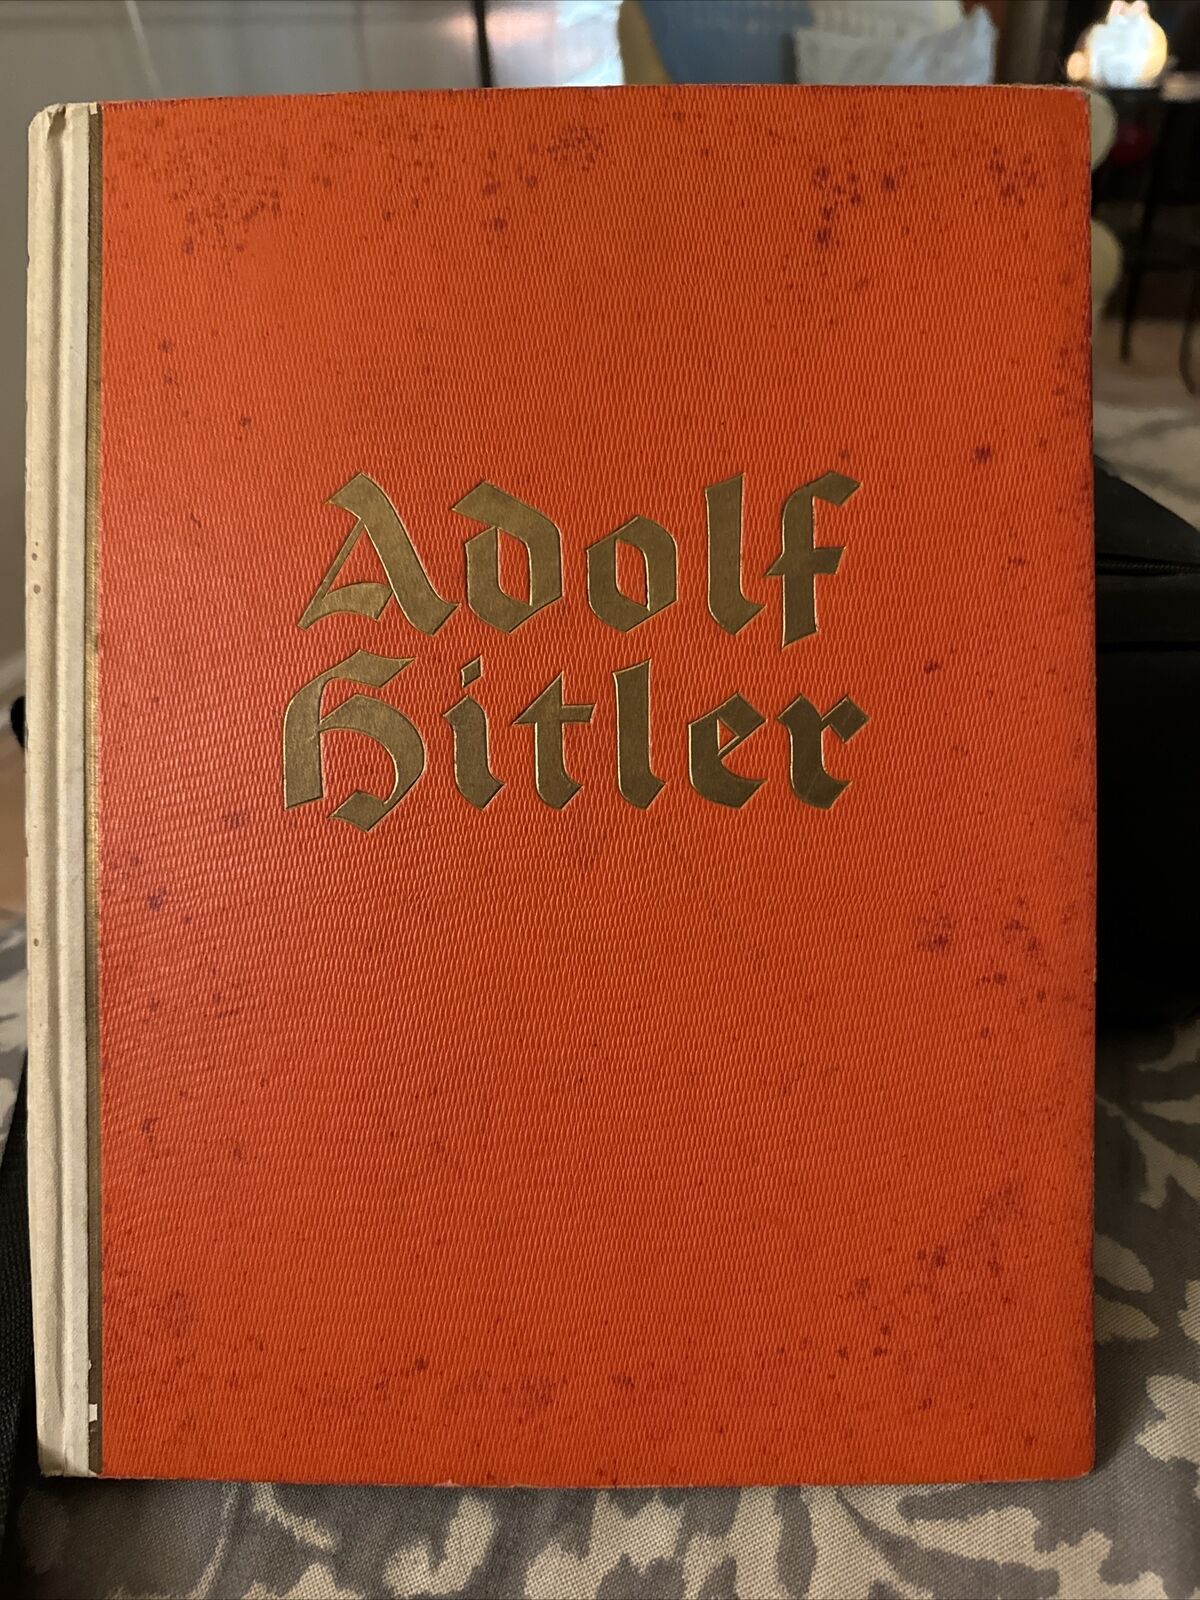 1936 Adolf Hitler Picture/Cigarette Book From The Life Of The Leader German